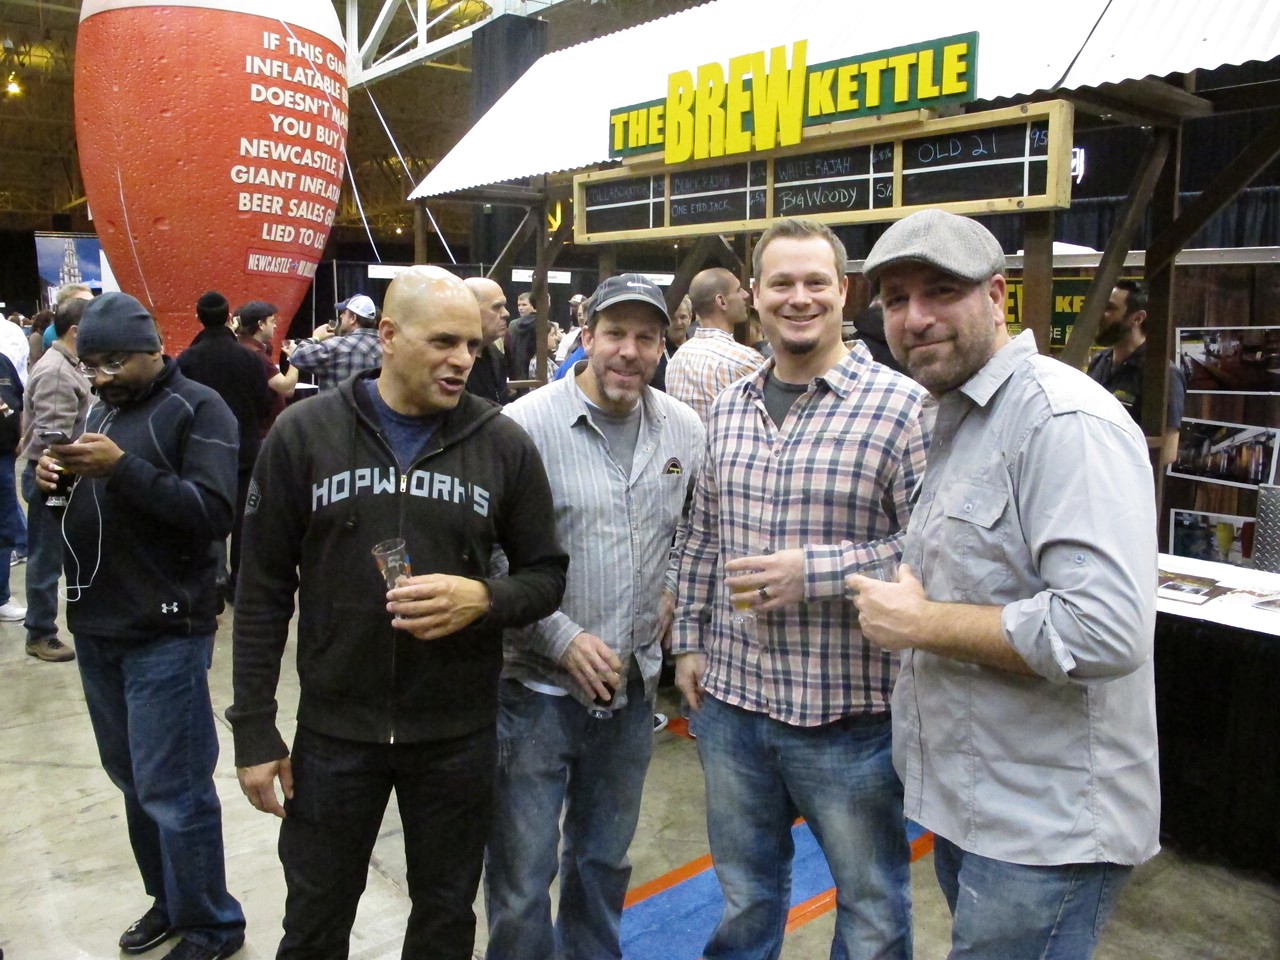 15 photos from the International Beer Fest Grand Tasting Session